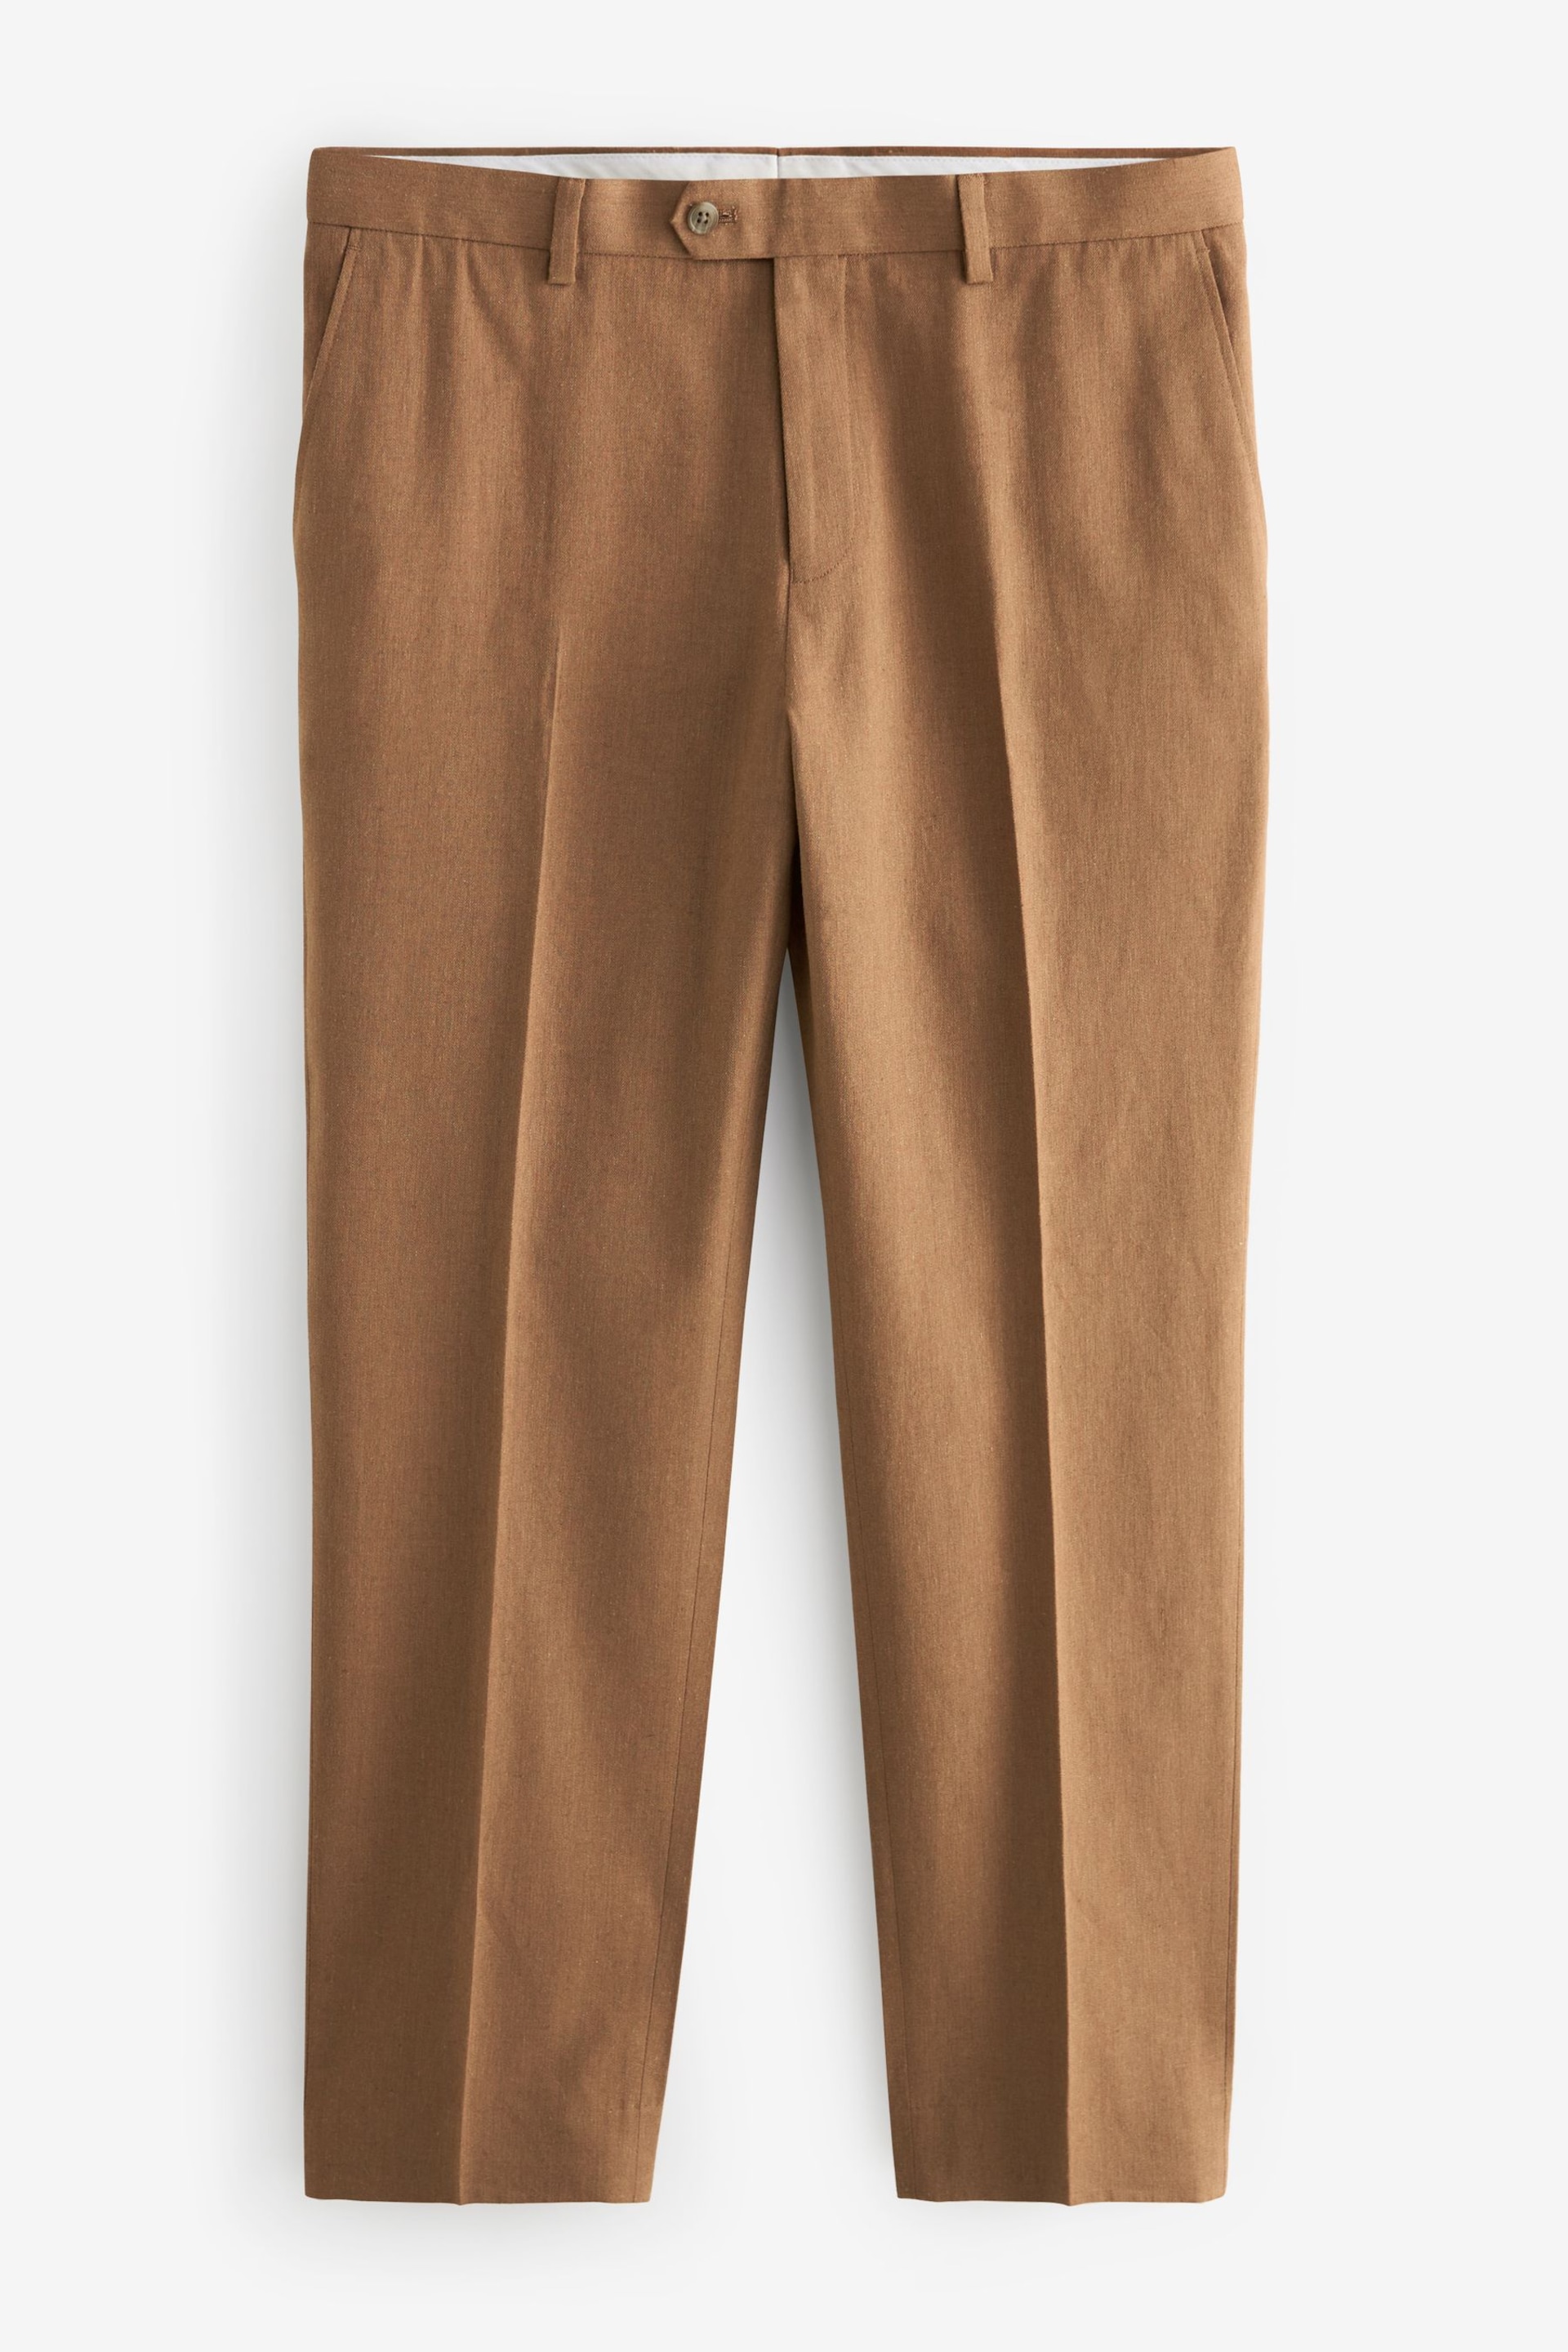 Rust Brown Linen Tailored Fit Suit: Trousers - Image 5 of 8